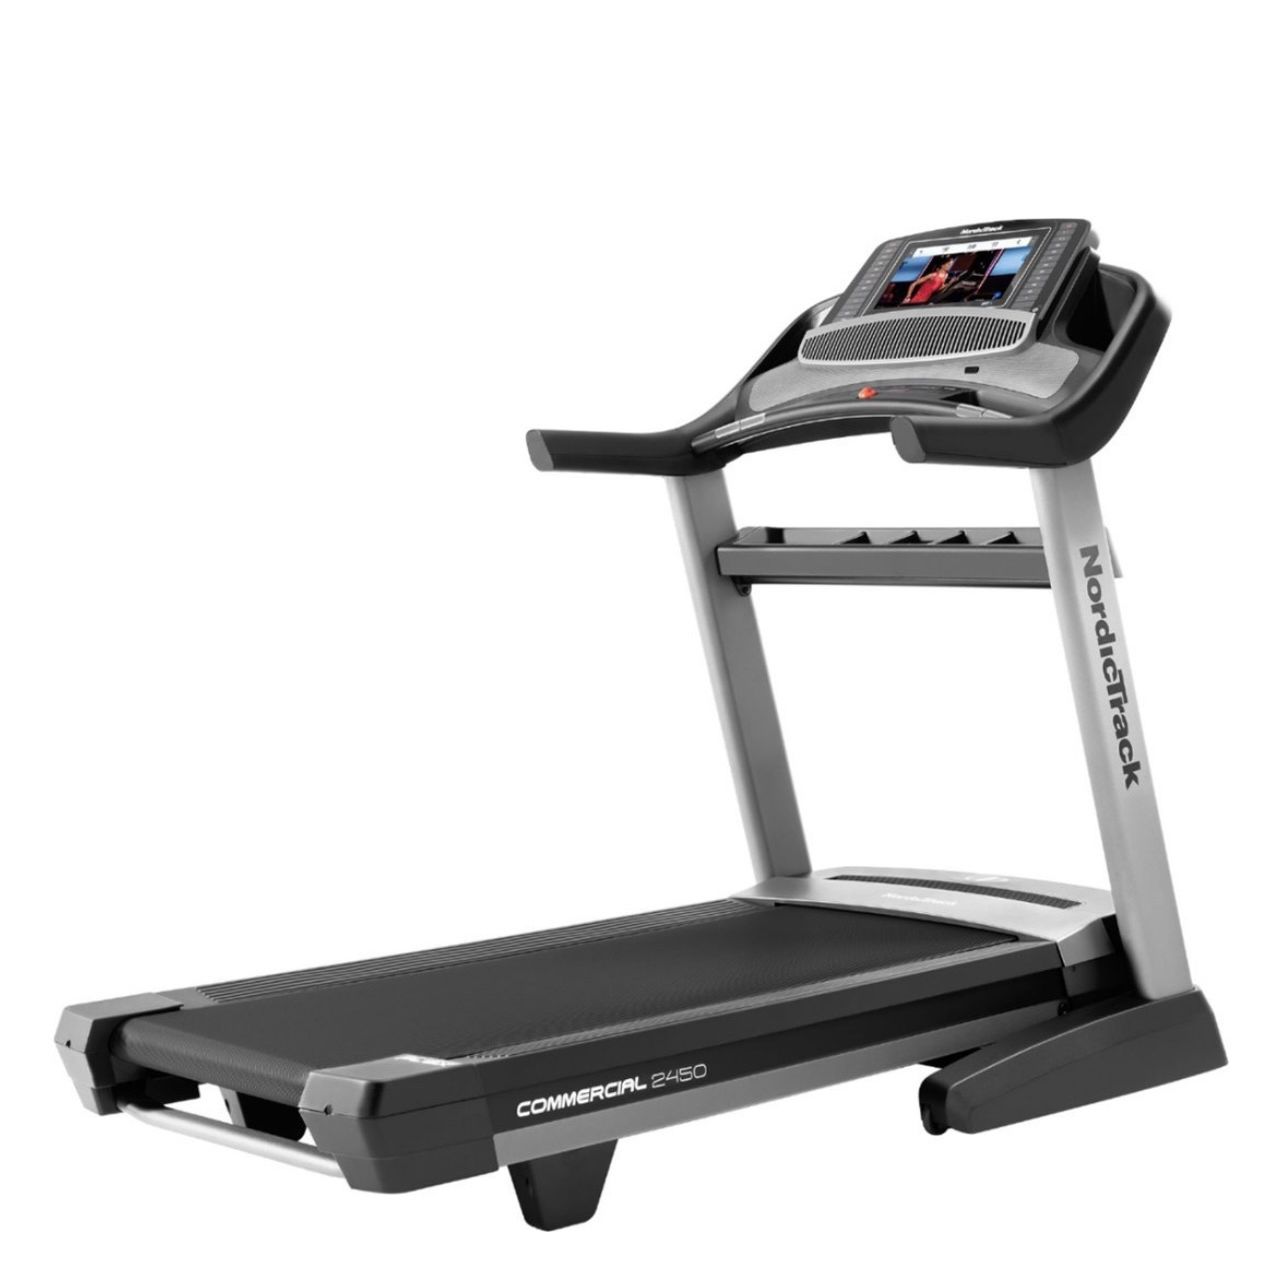 Nordictrack 2450 Commercial Treadmill. Like New!